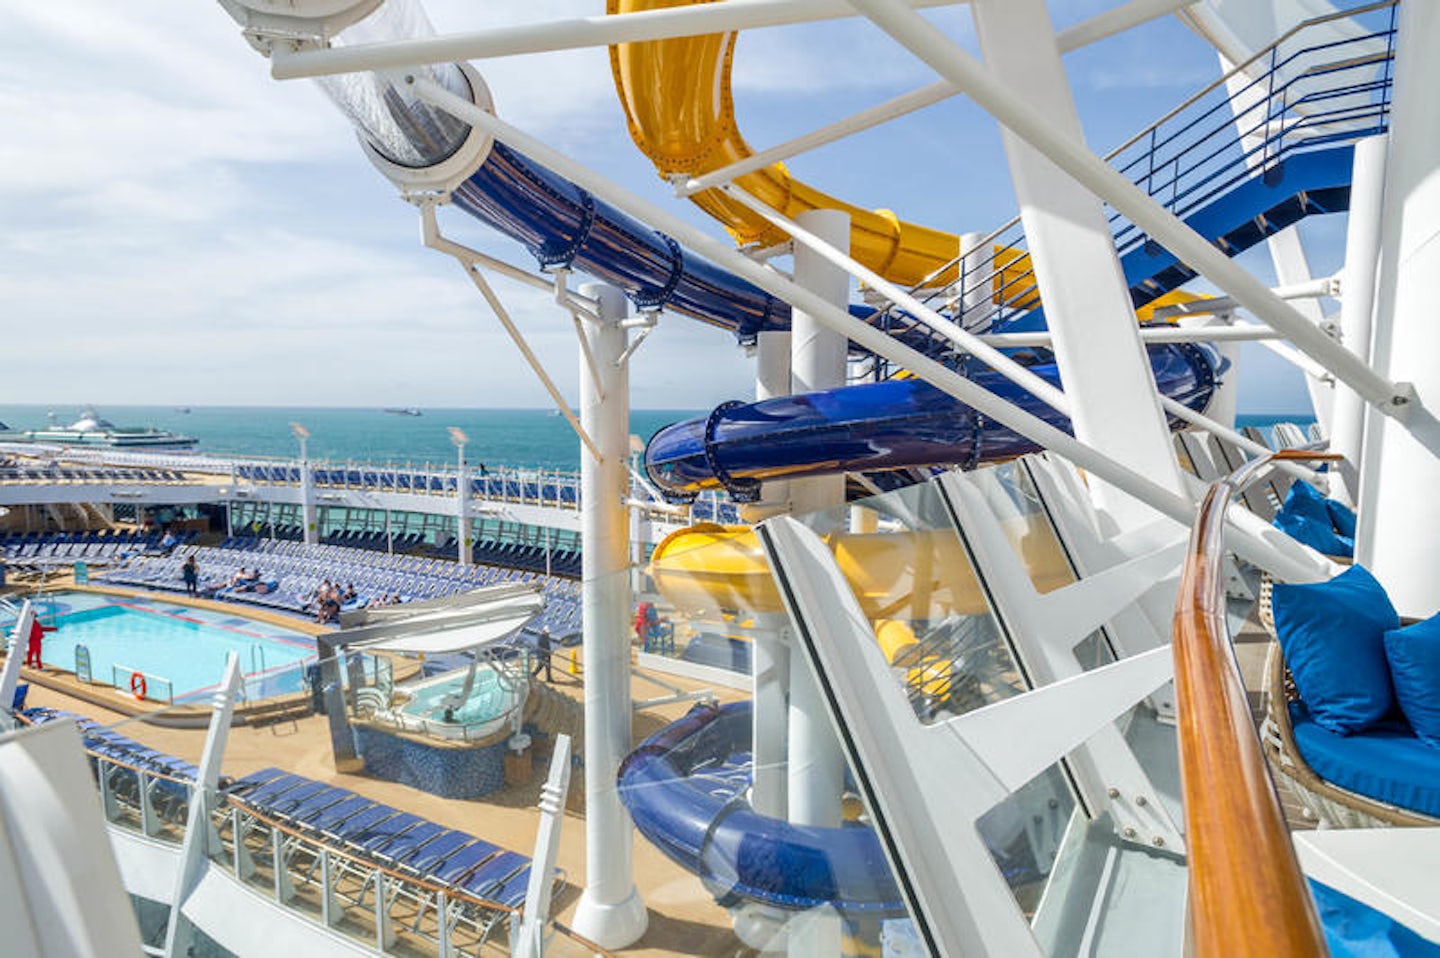 The Perfect Storm Water Slides on Symphony of the Seas